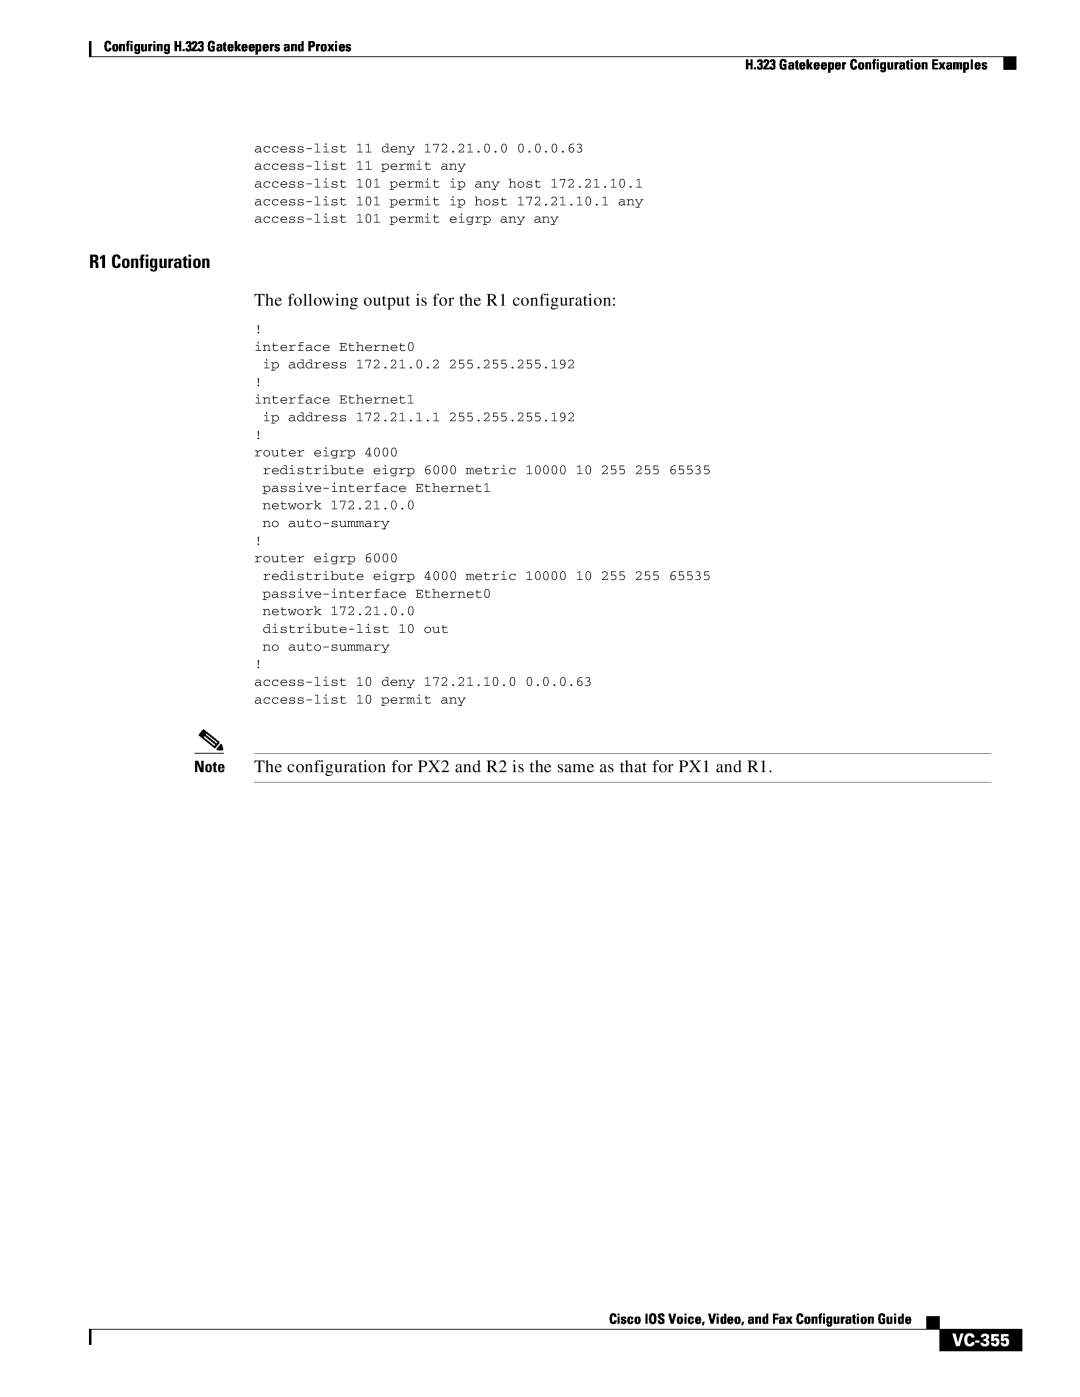 Cisco Systems VC-289 manual R1 Configuration, VC-355, Configuring H.323 Gatekeepers and Proxies 